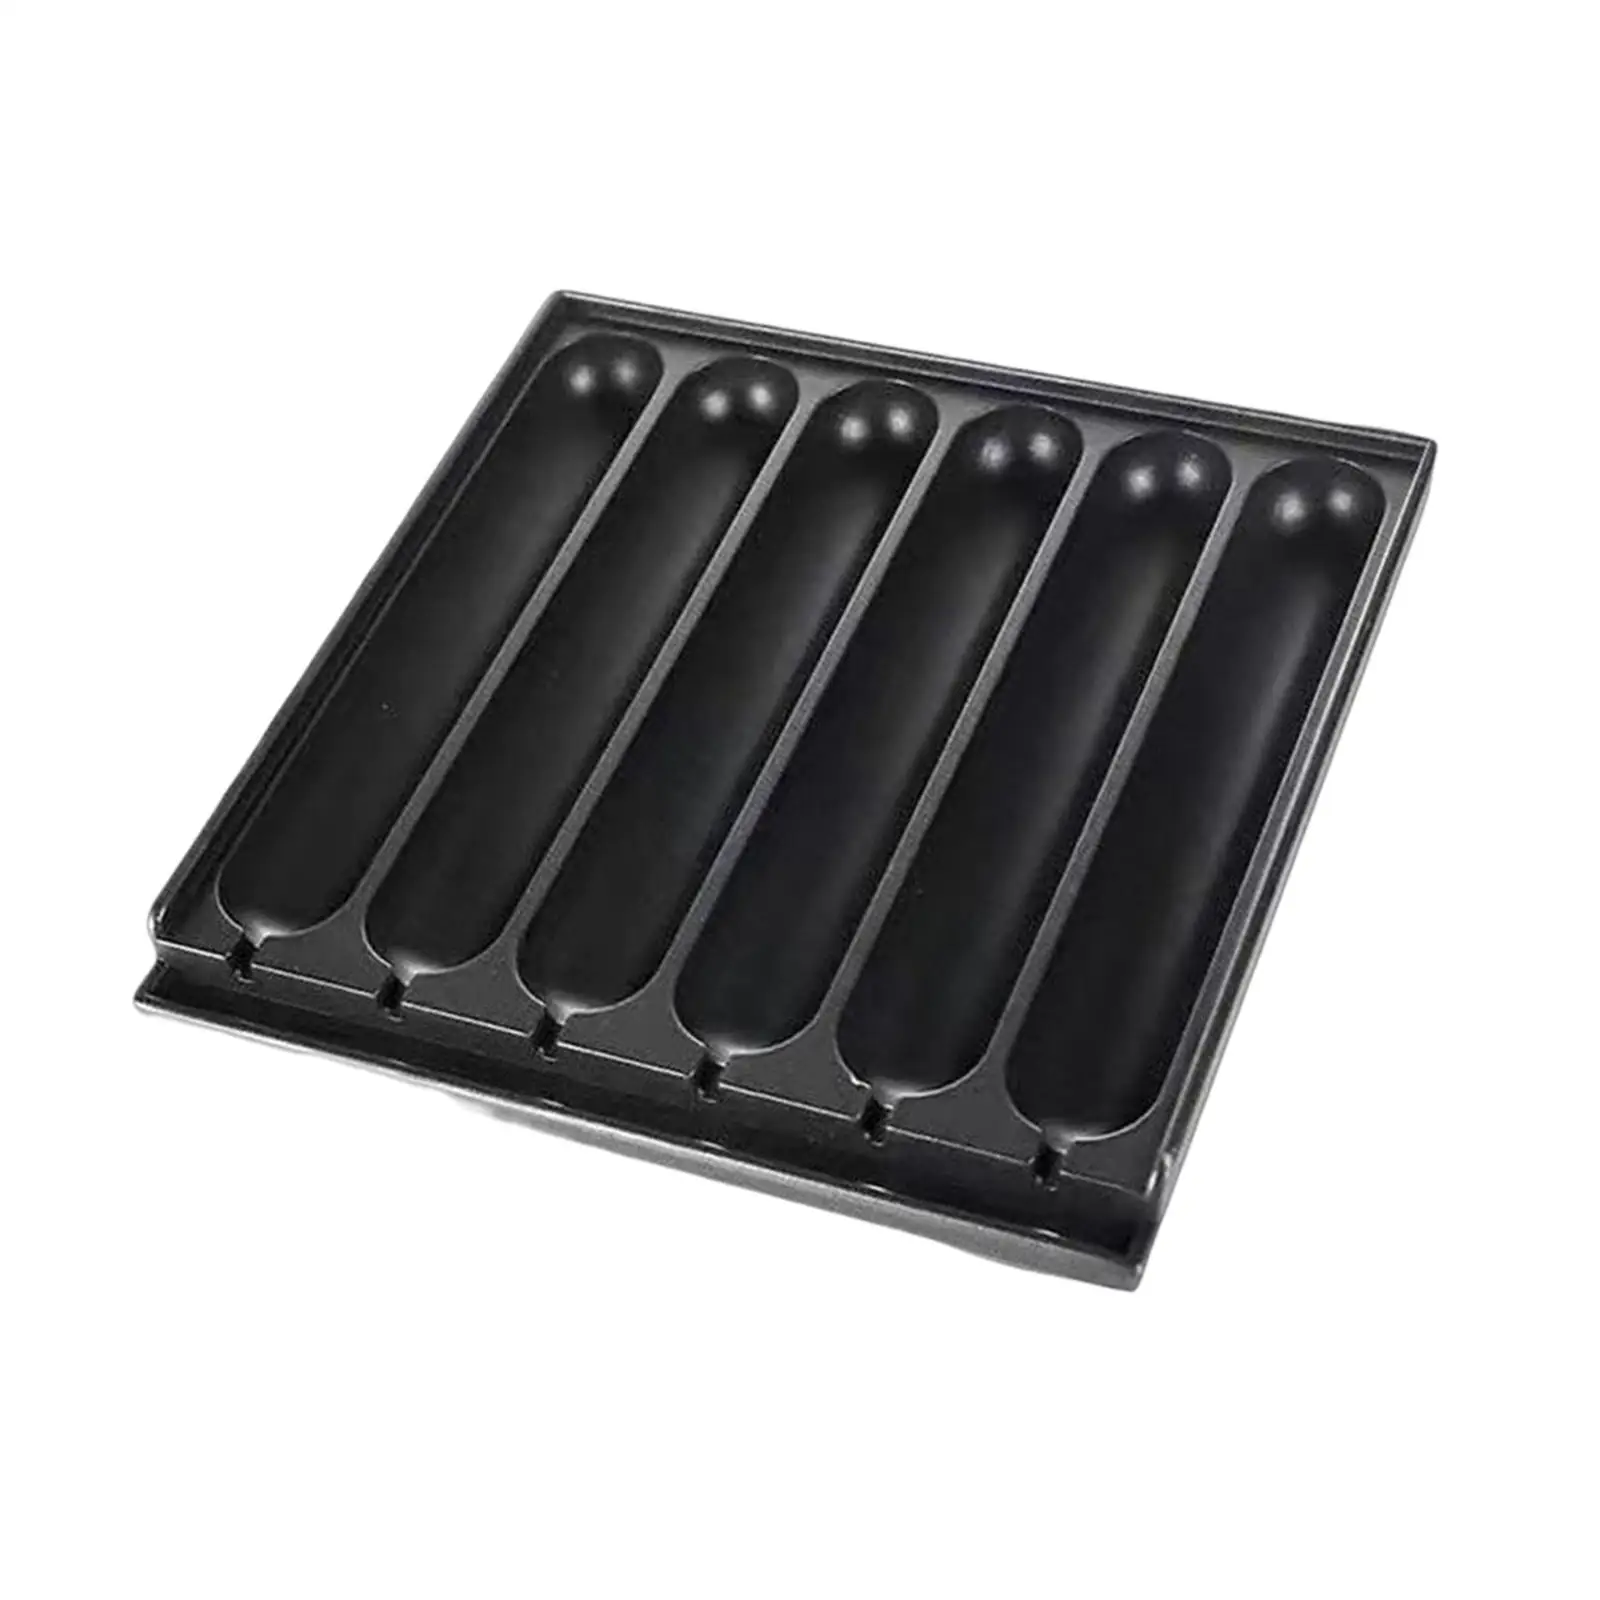 Sausage Grilling Pan Corn maker, 6 Cavity, Aluminum Alloy Hot maker Grill Pan for Cooking, Kitchen